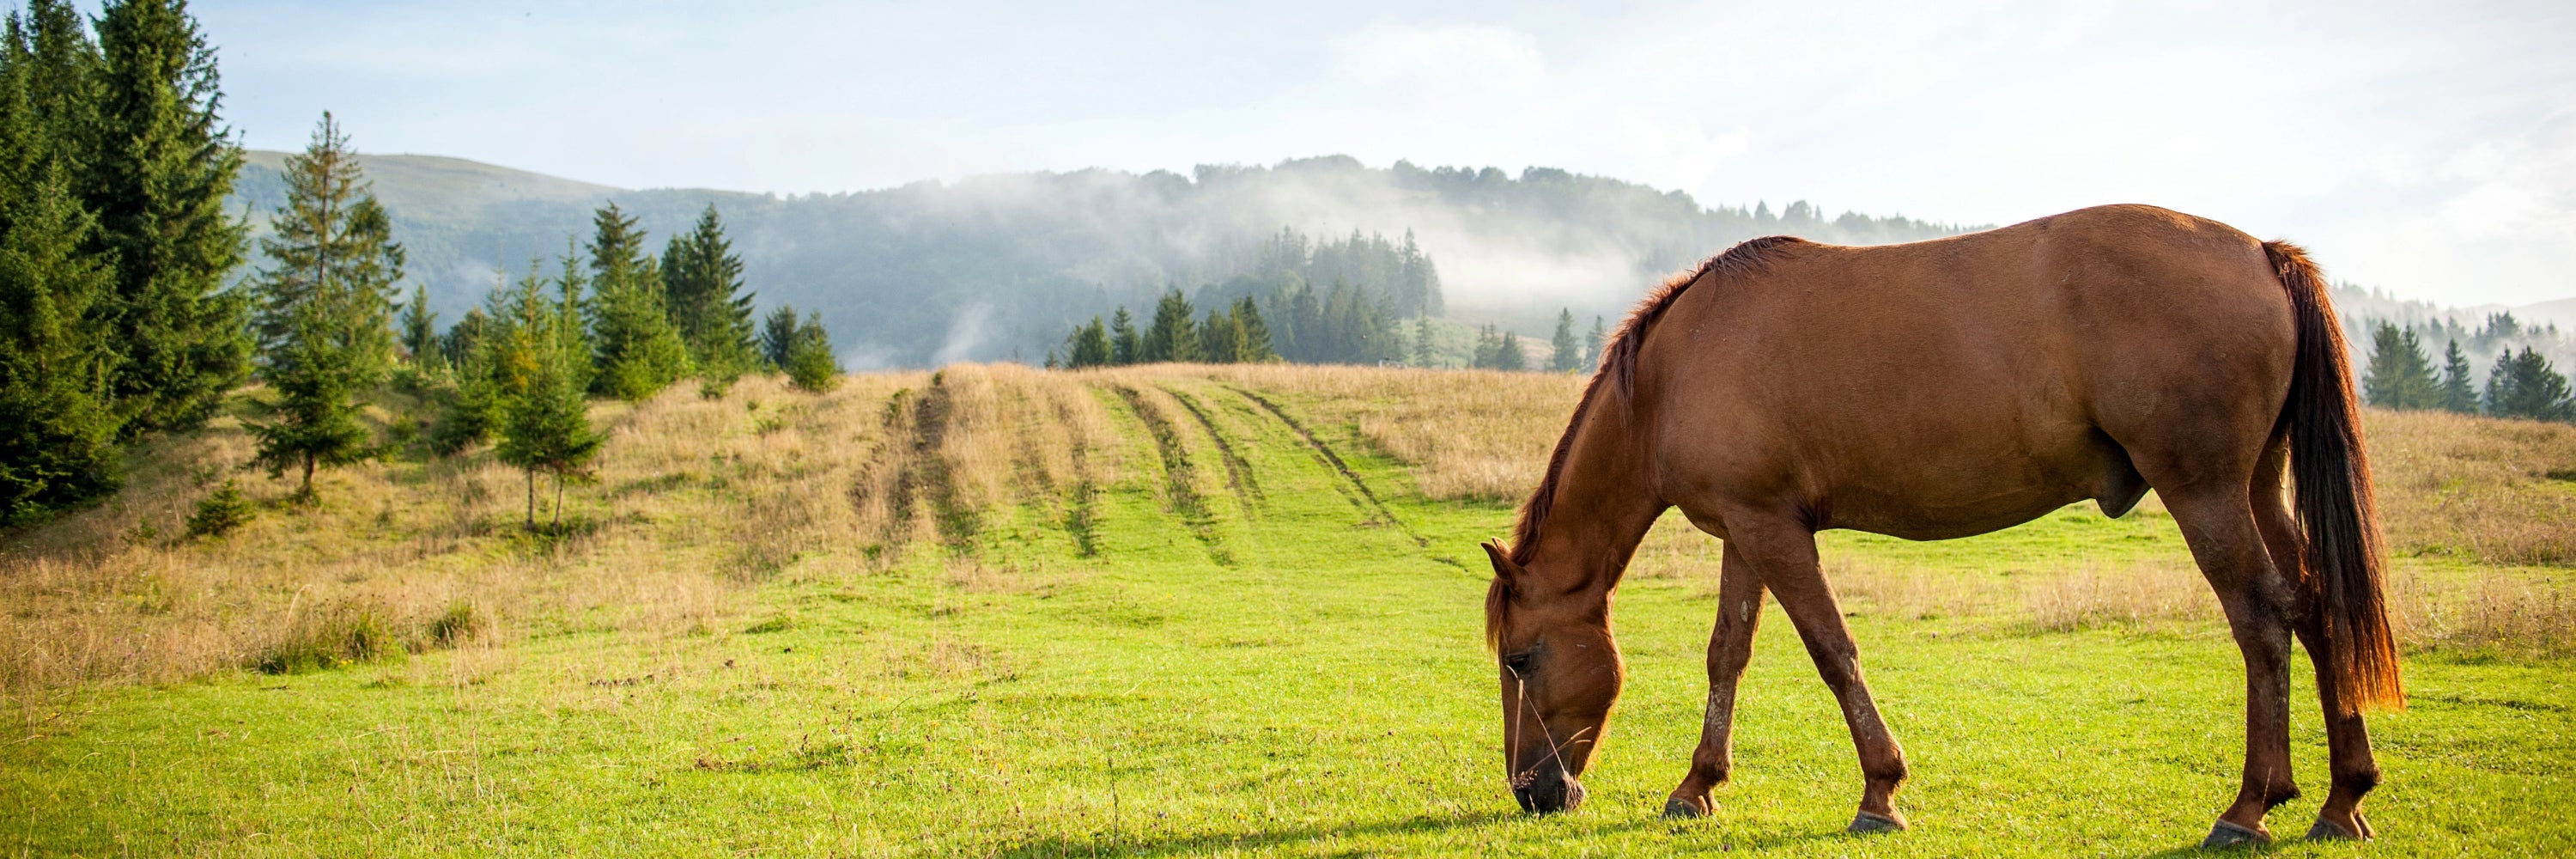 Horse eating grass, unbothered by flies. Feed Through Fly Control for Horses 	Fly Repellent for Horses, All Natural Fly Spray for Horses